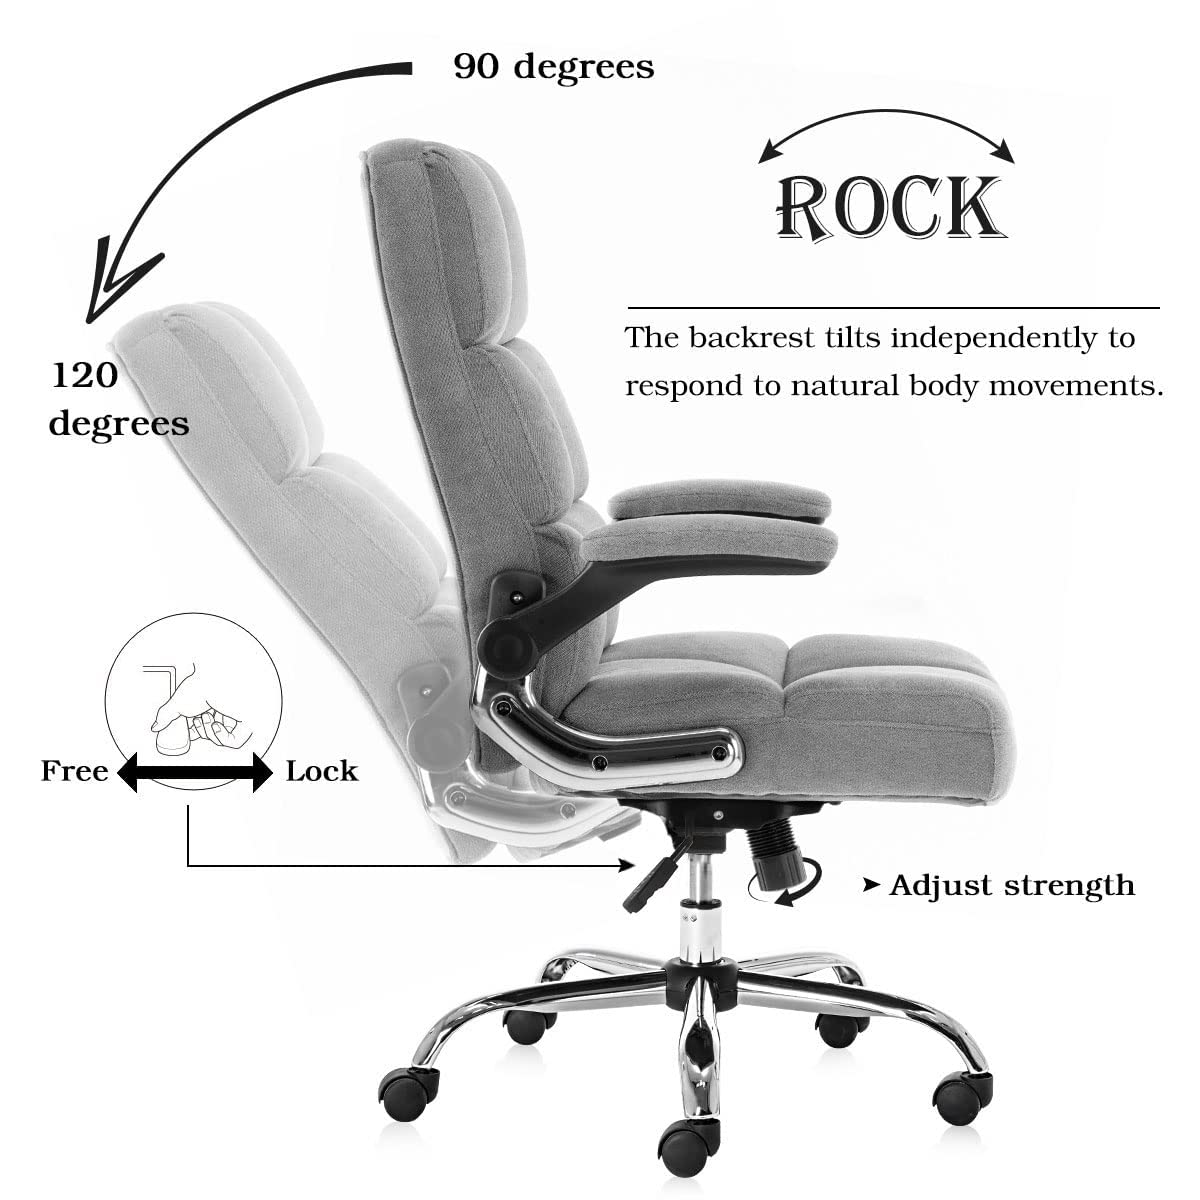 Fabric Home Ergonomic Swivel Adjustable Tilt Angle and Flip-up Arms Office Chair -Gray Odin Furniture